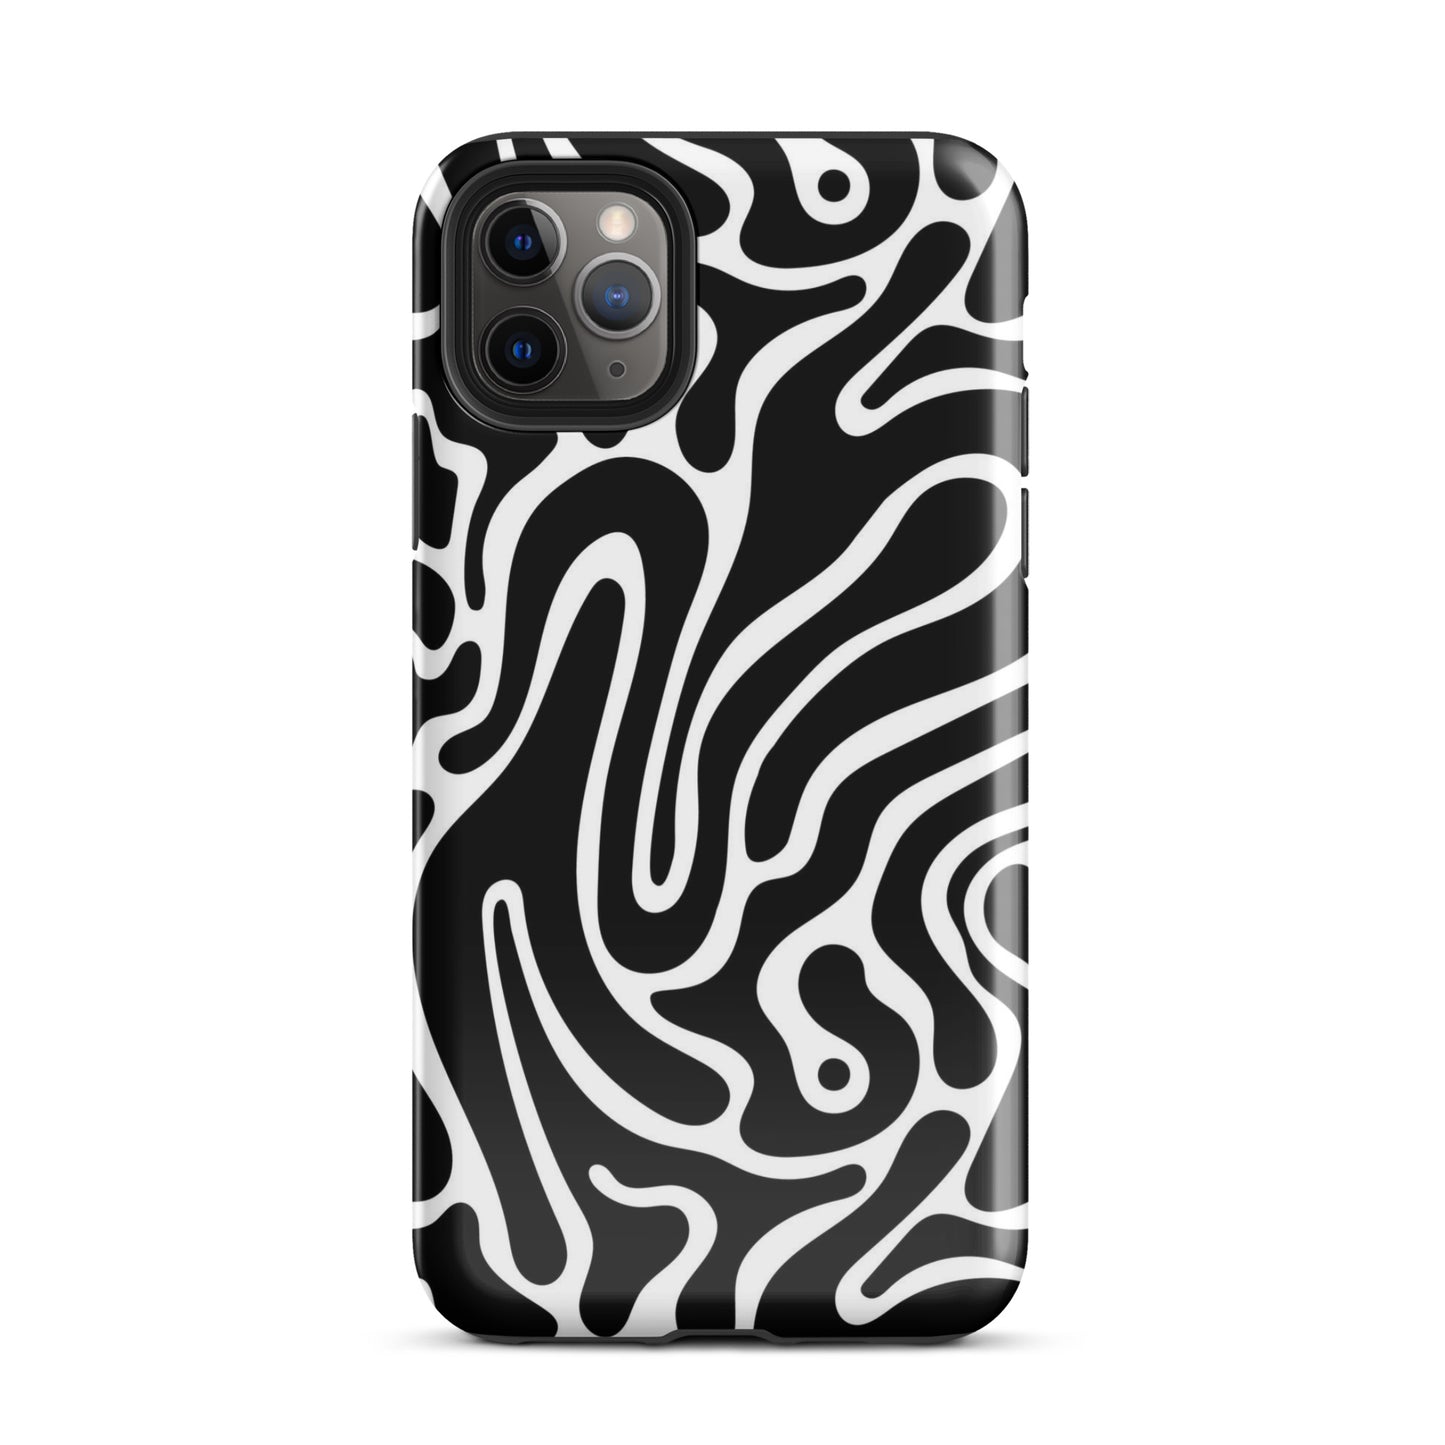 Wavy Noir iPhone Case iPhone 11 Pro Max Glossy